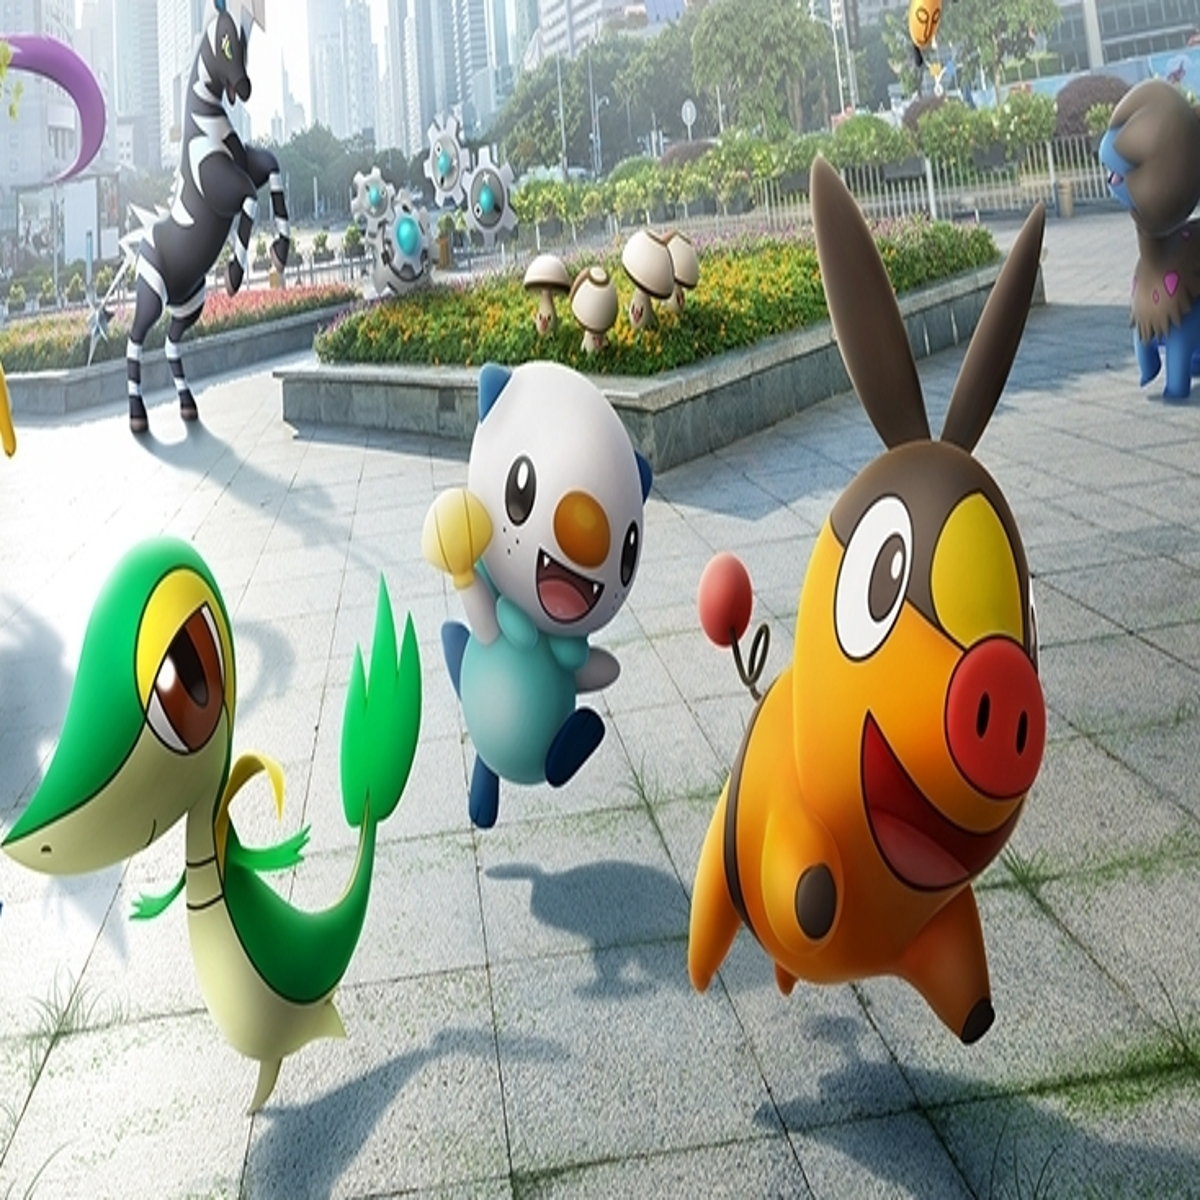 Pokémon Global News - Unova Starters with their Hidden ability will be  given in Japan The event codes will be given on Pokémon Get☆TV and the  Corocoro Magazine - The Serperior with